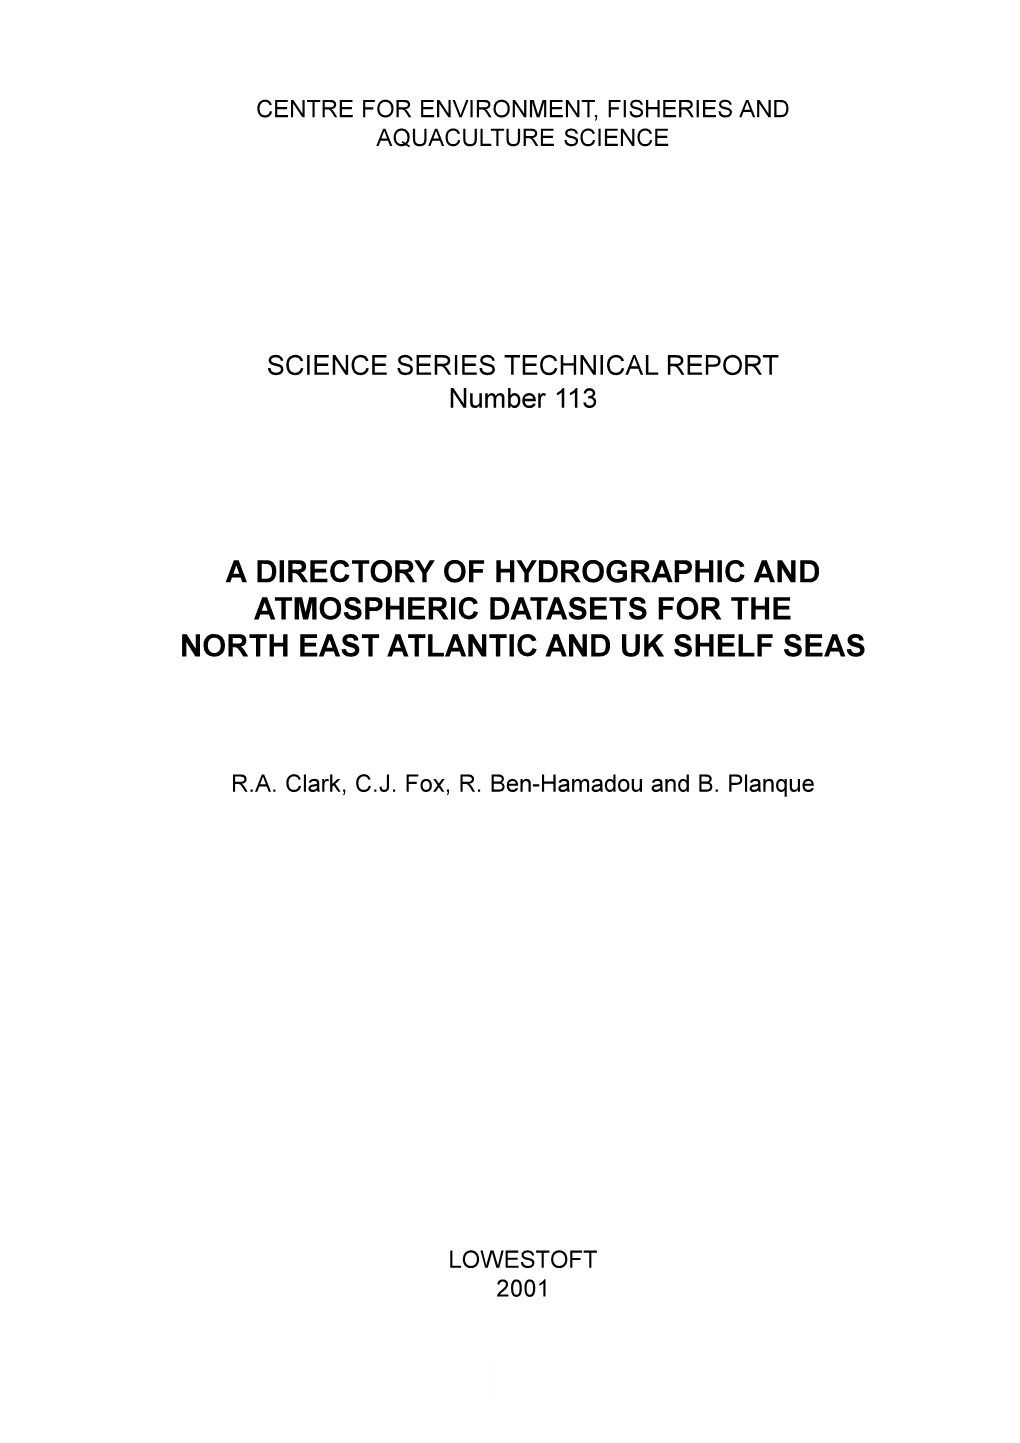 A Directory of Hydrographical and Atmospheric Datasets for the North